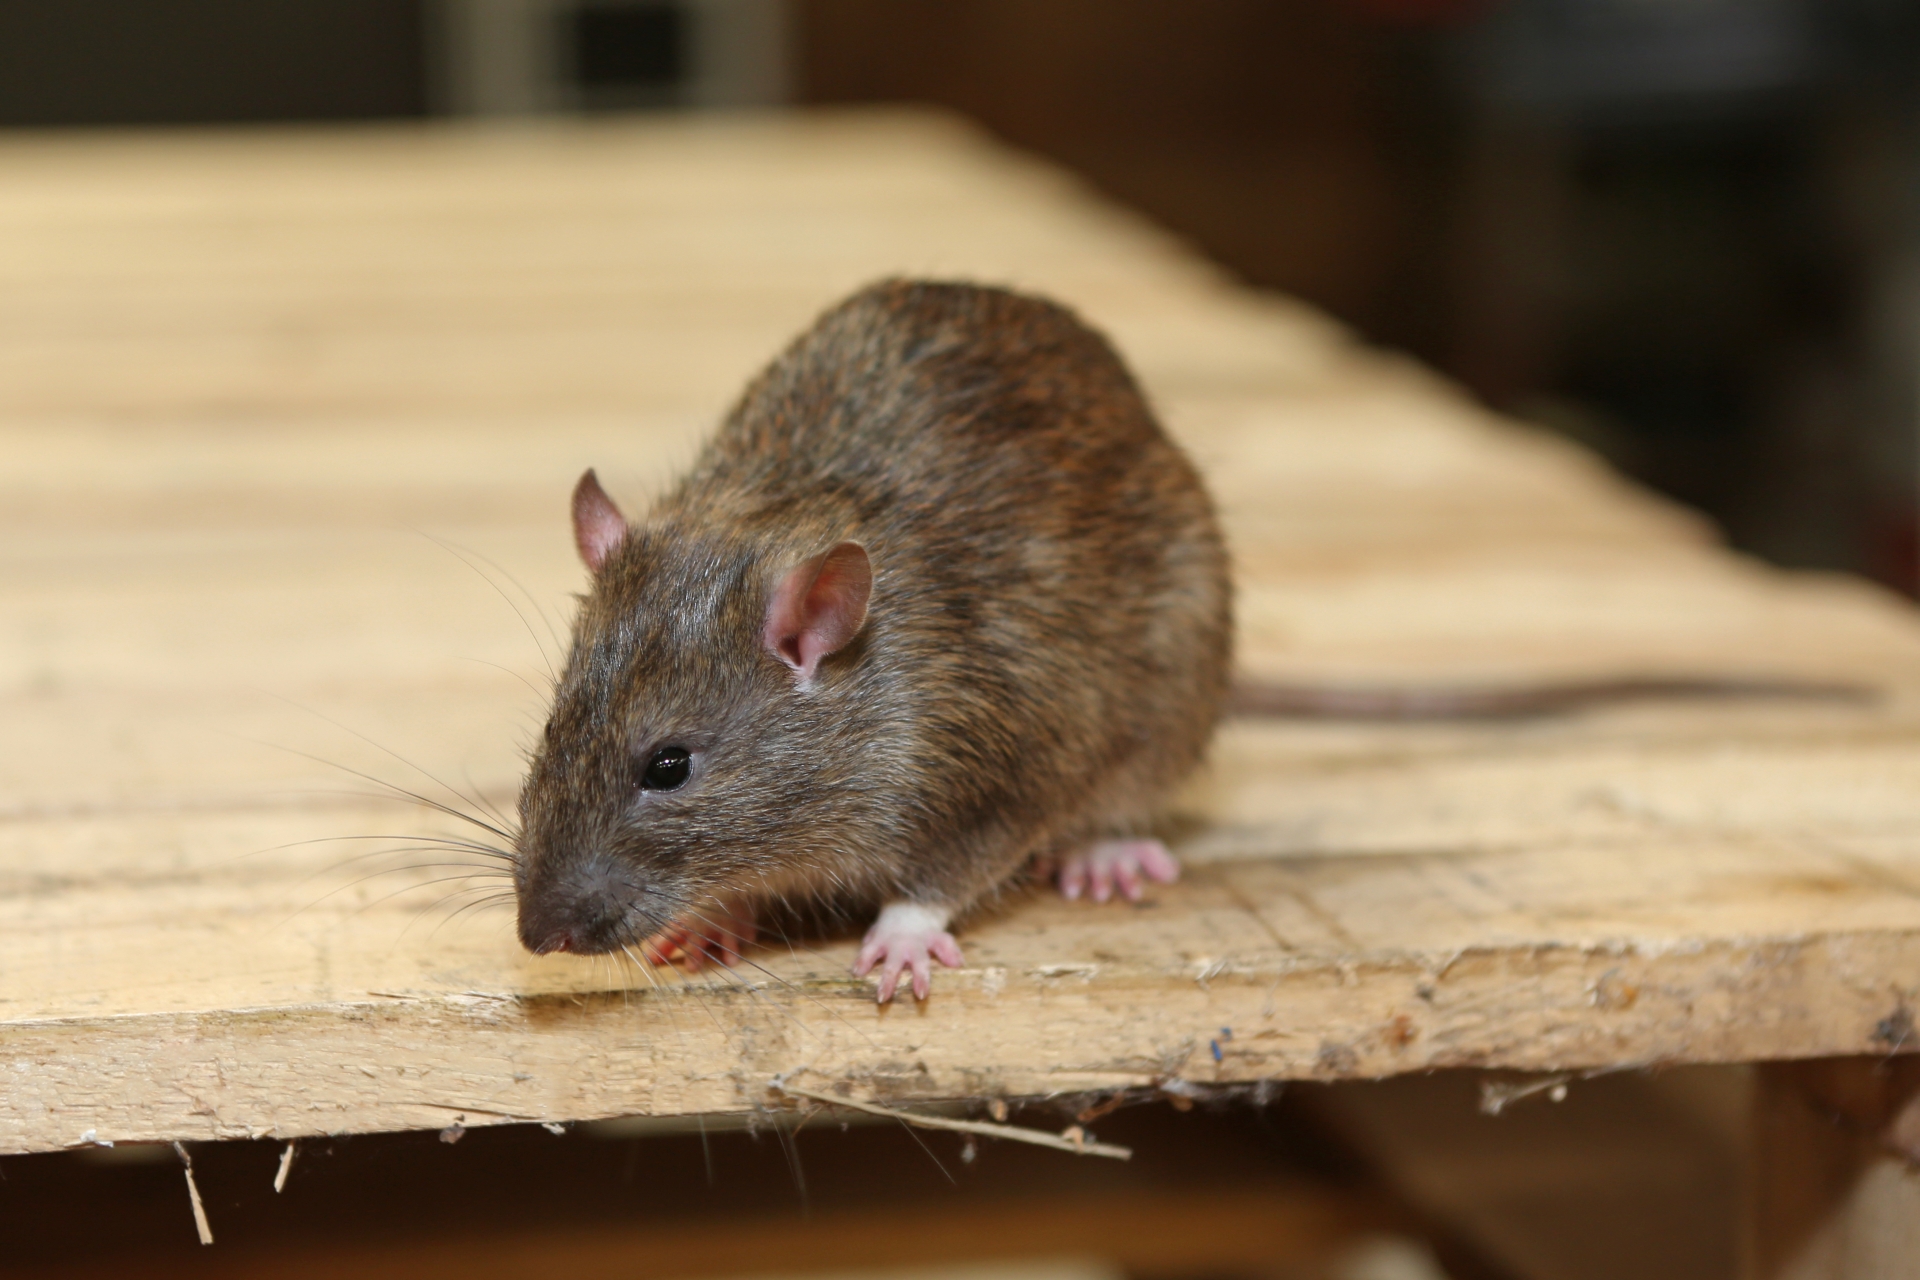 Rat Infestation, Pest Control in Great Bookham, Little Bookham, KT23. Call Now 020 8166 9746